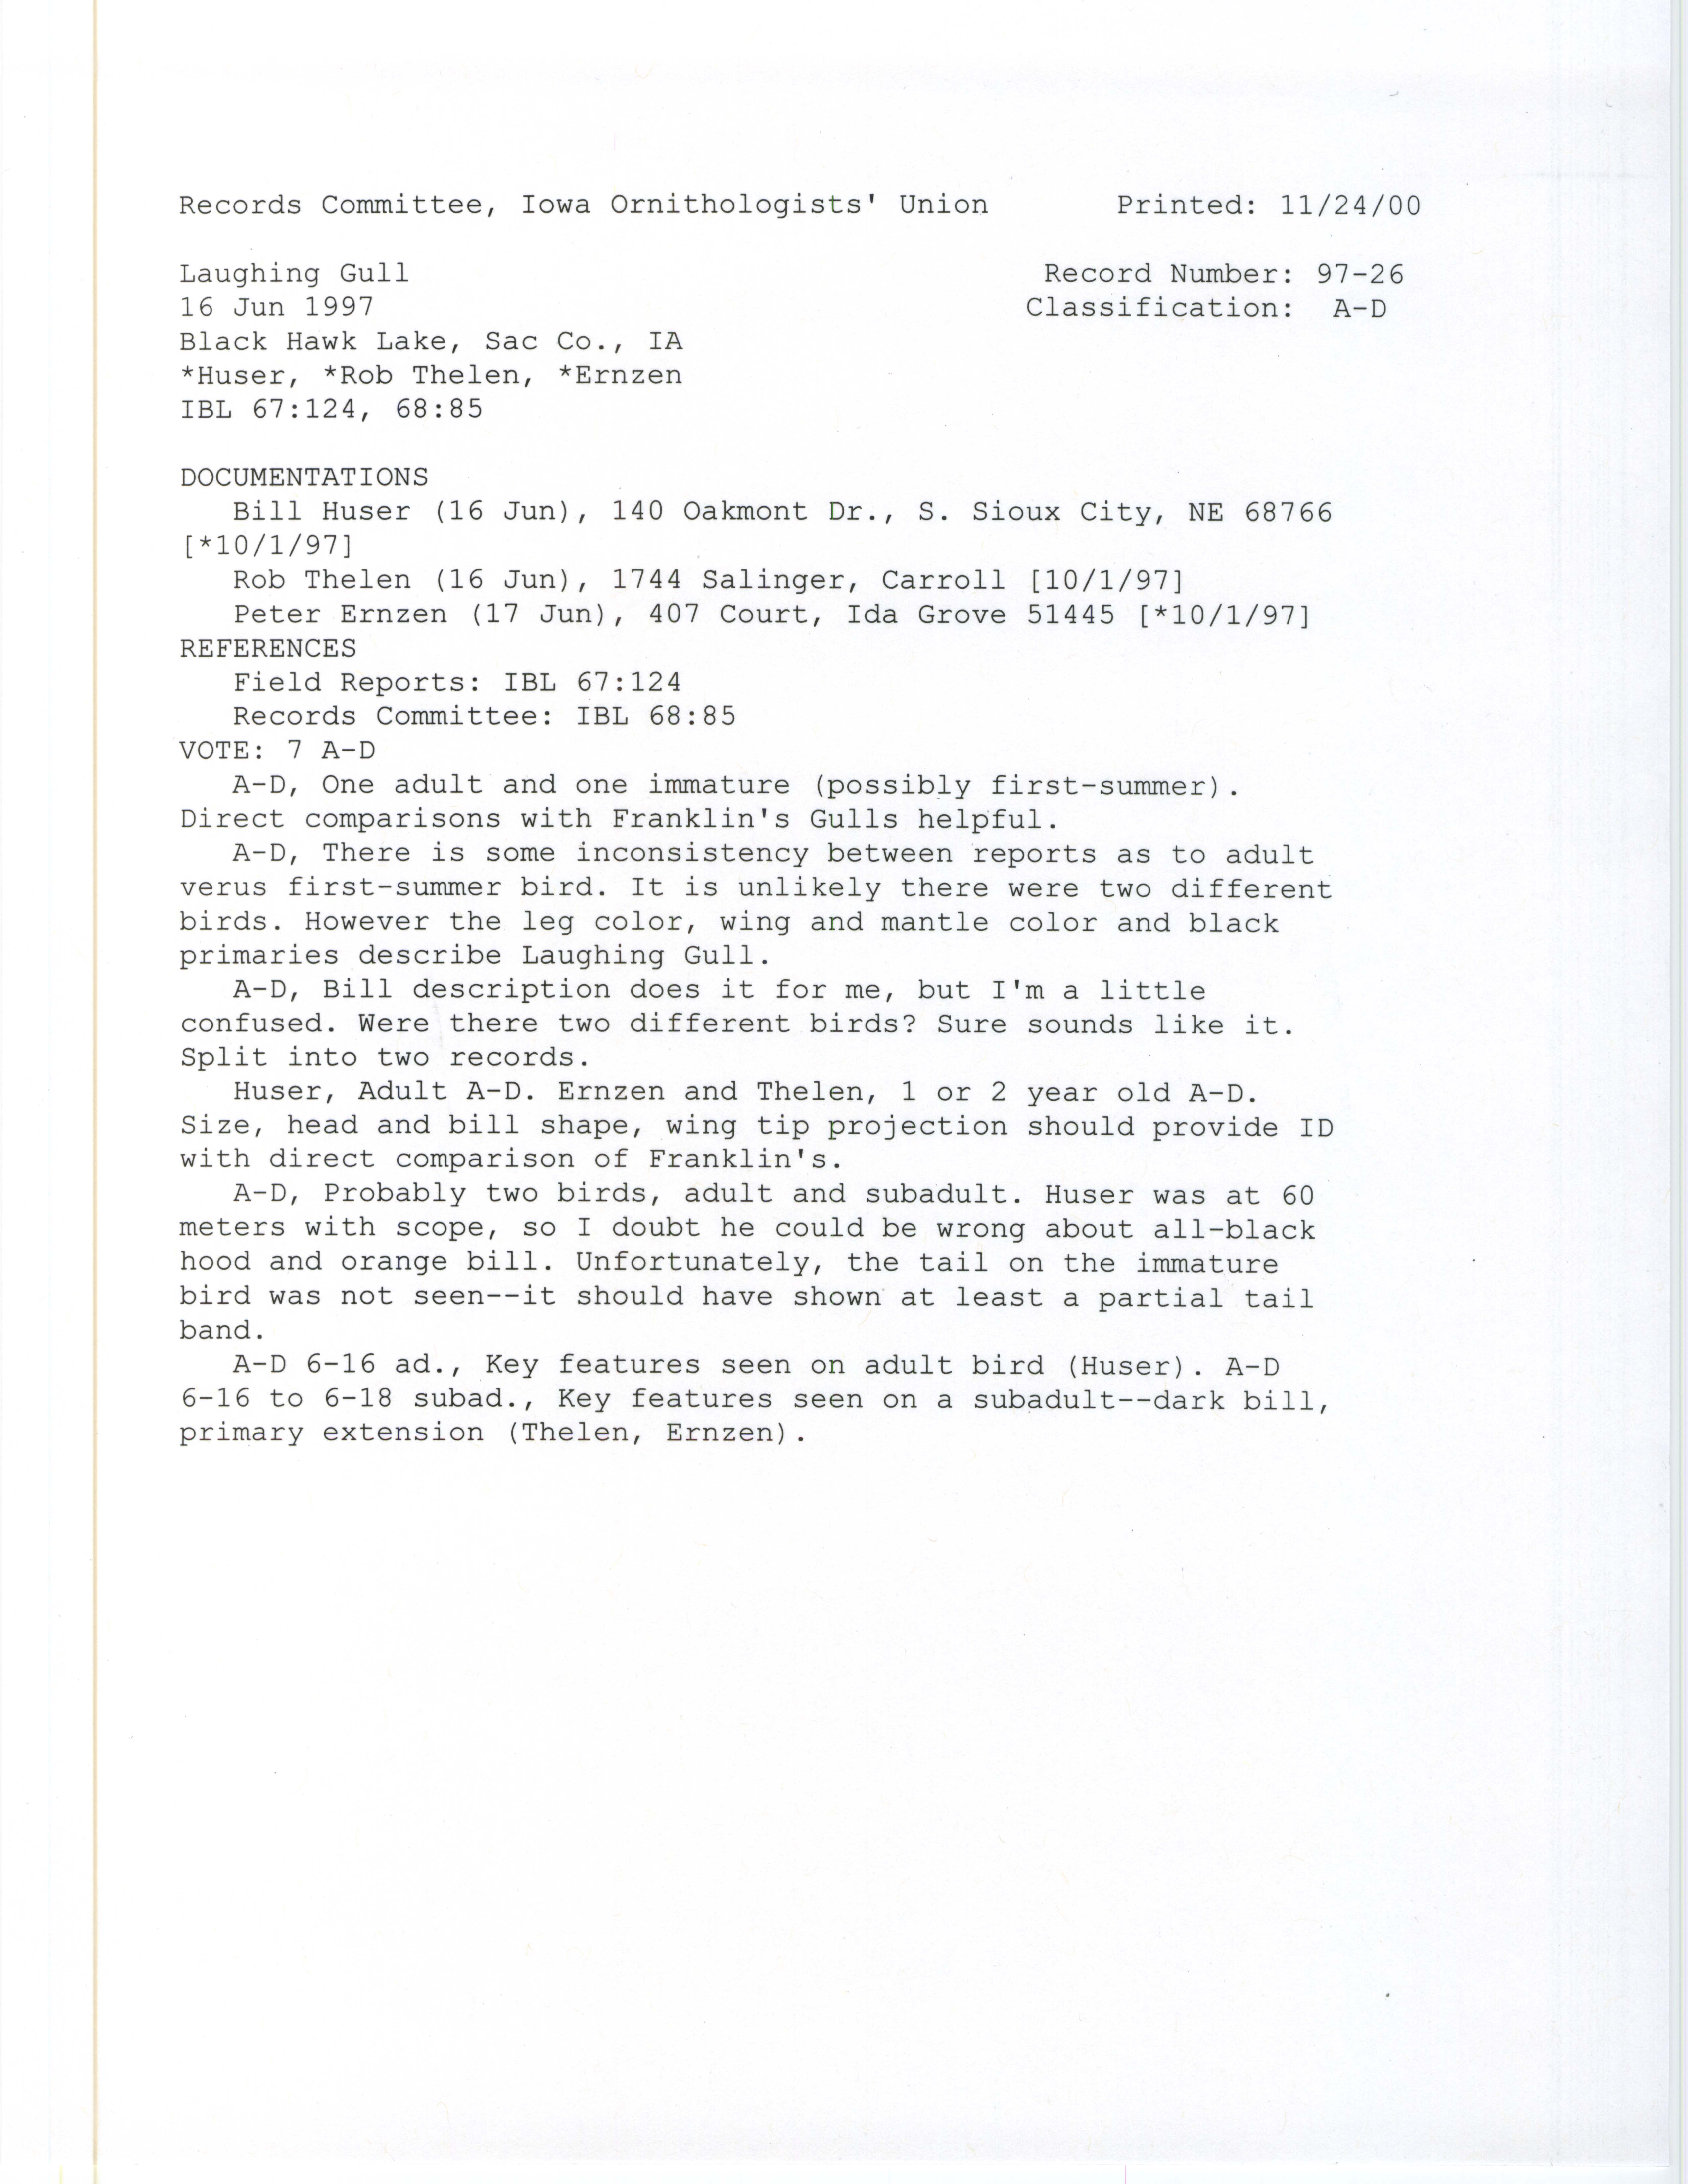 Records Committee review for rare bird sighting of Laughing Gull at Black Hawk Lake, 1997